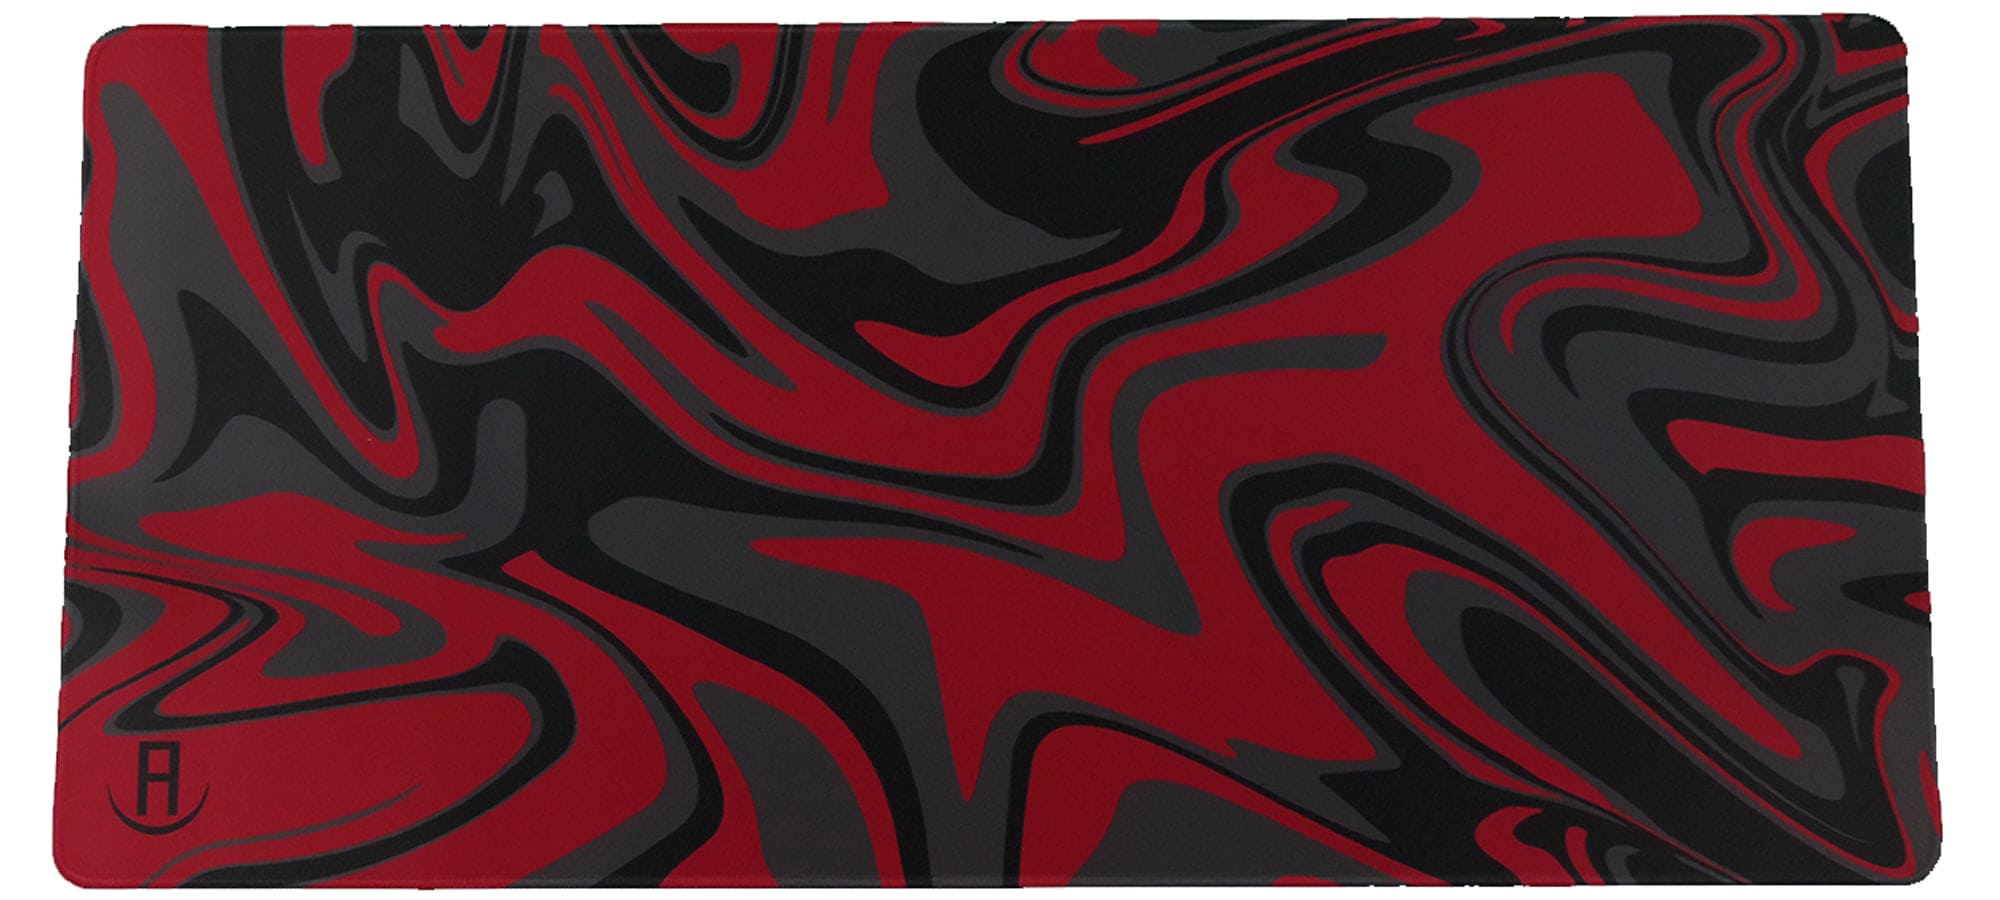 Black grey and red liquefied deskpad and mousepad front view